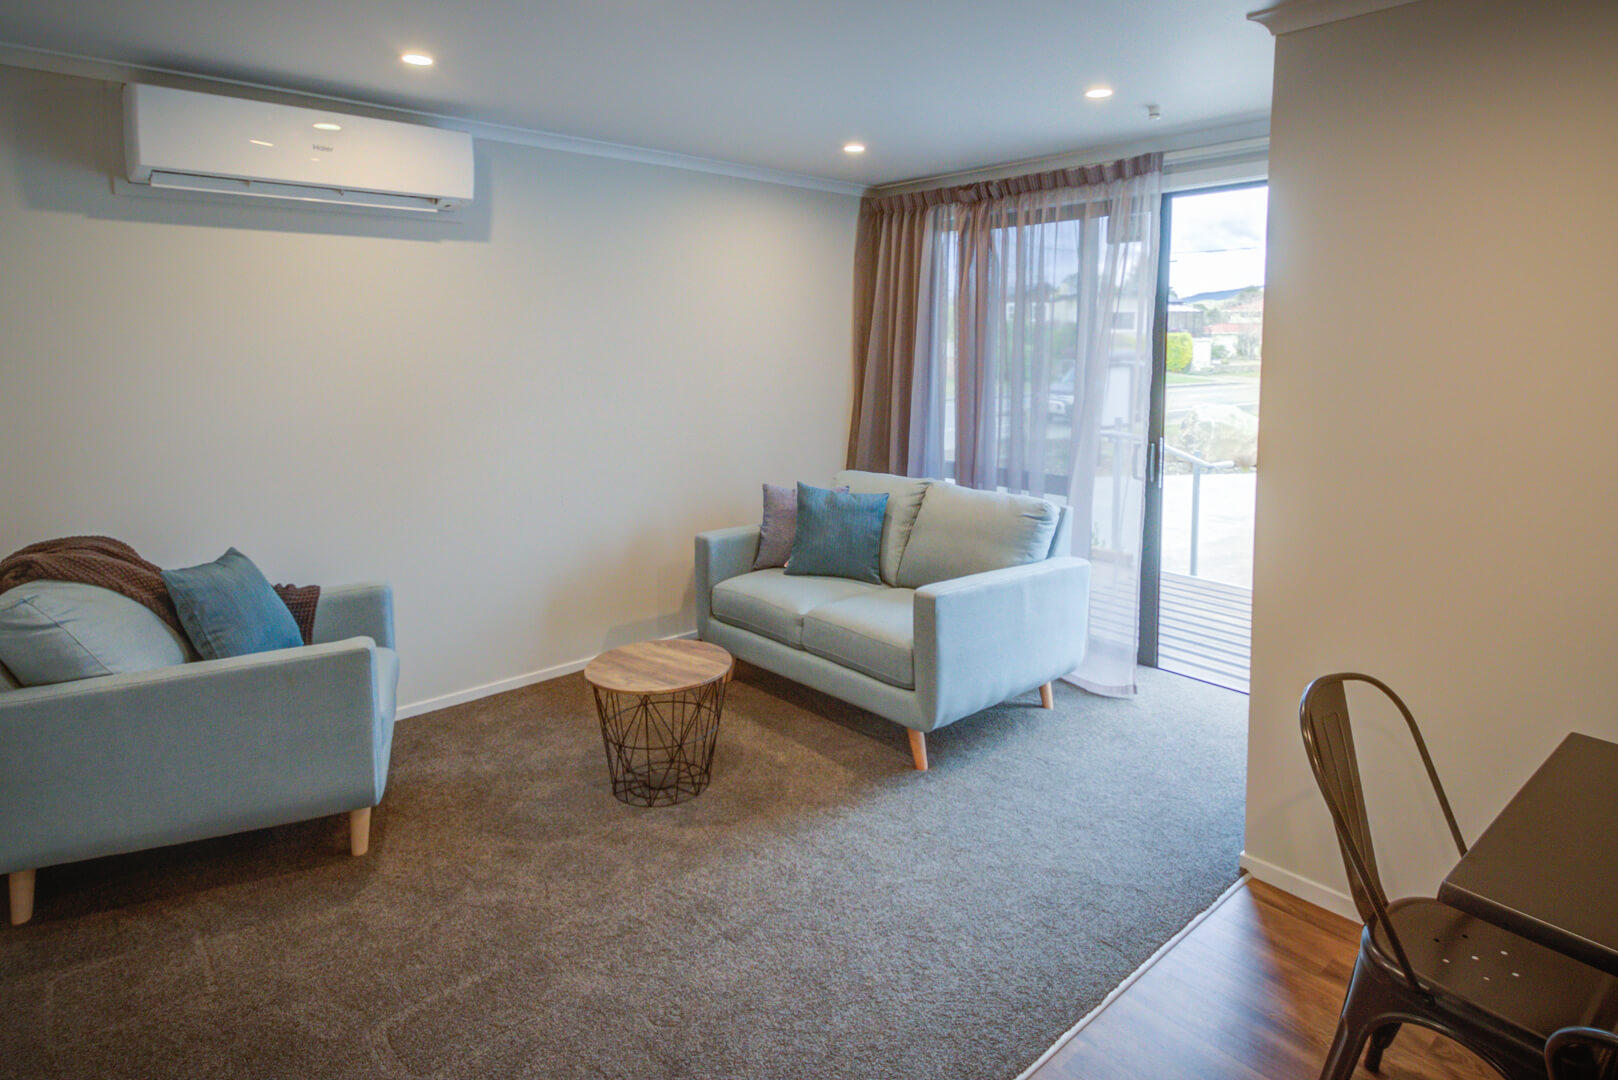 Lounge room of Dusky Motels one-bedroom units with powder blue modern lounge suites